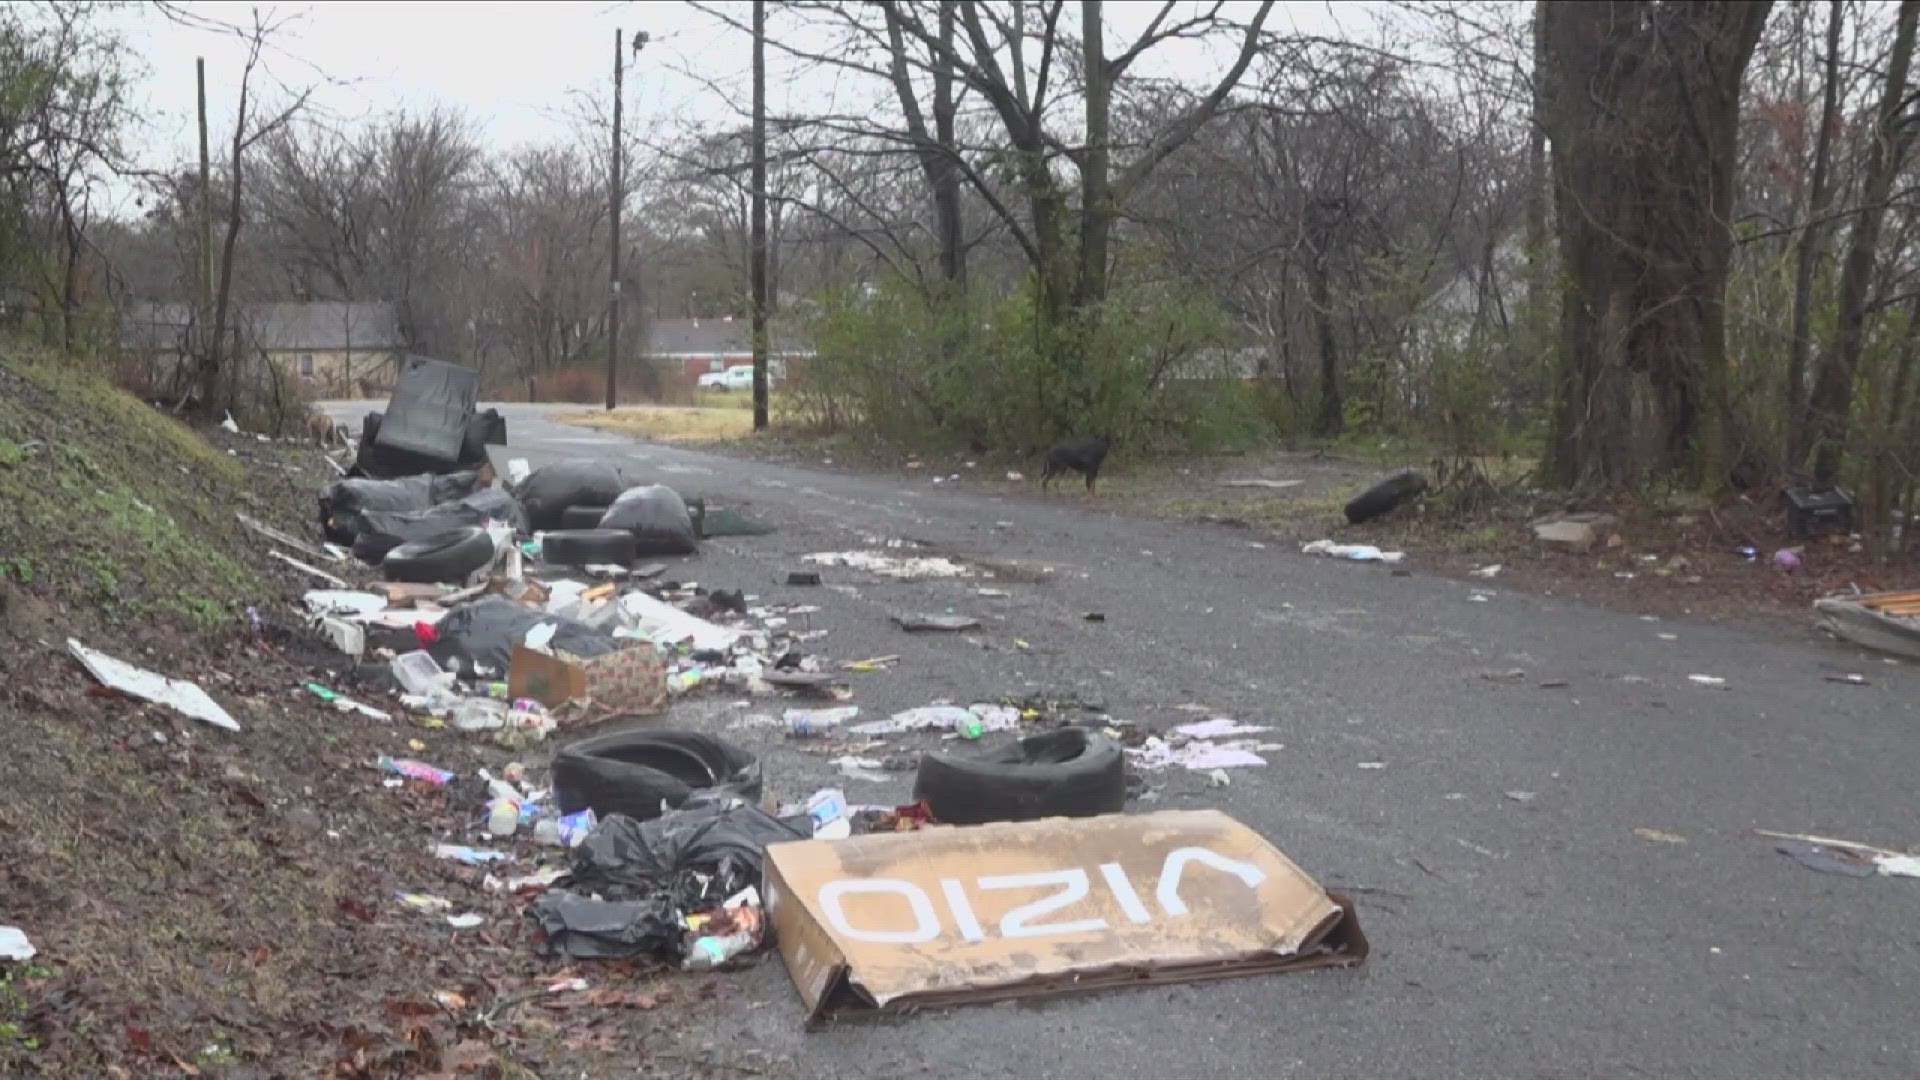 Problems with blight and illegal dumping continue to plague Shelby County, hampering growth in the affected neighborhoods.